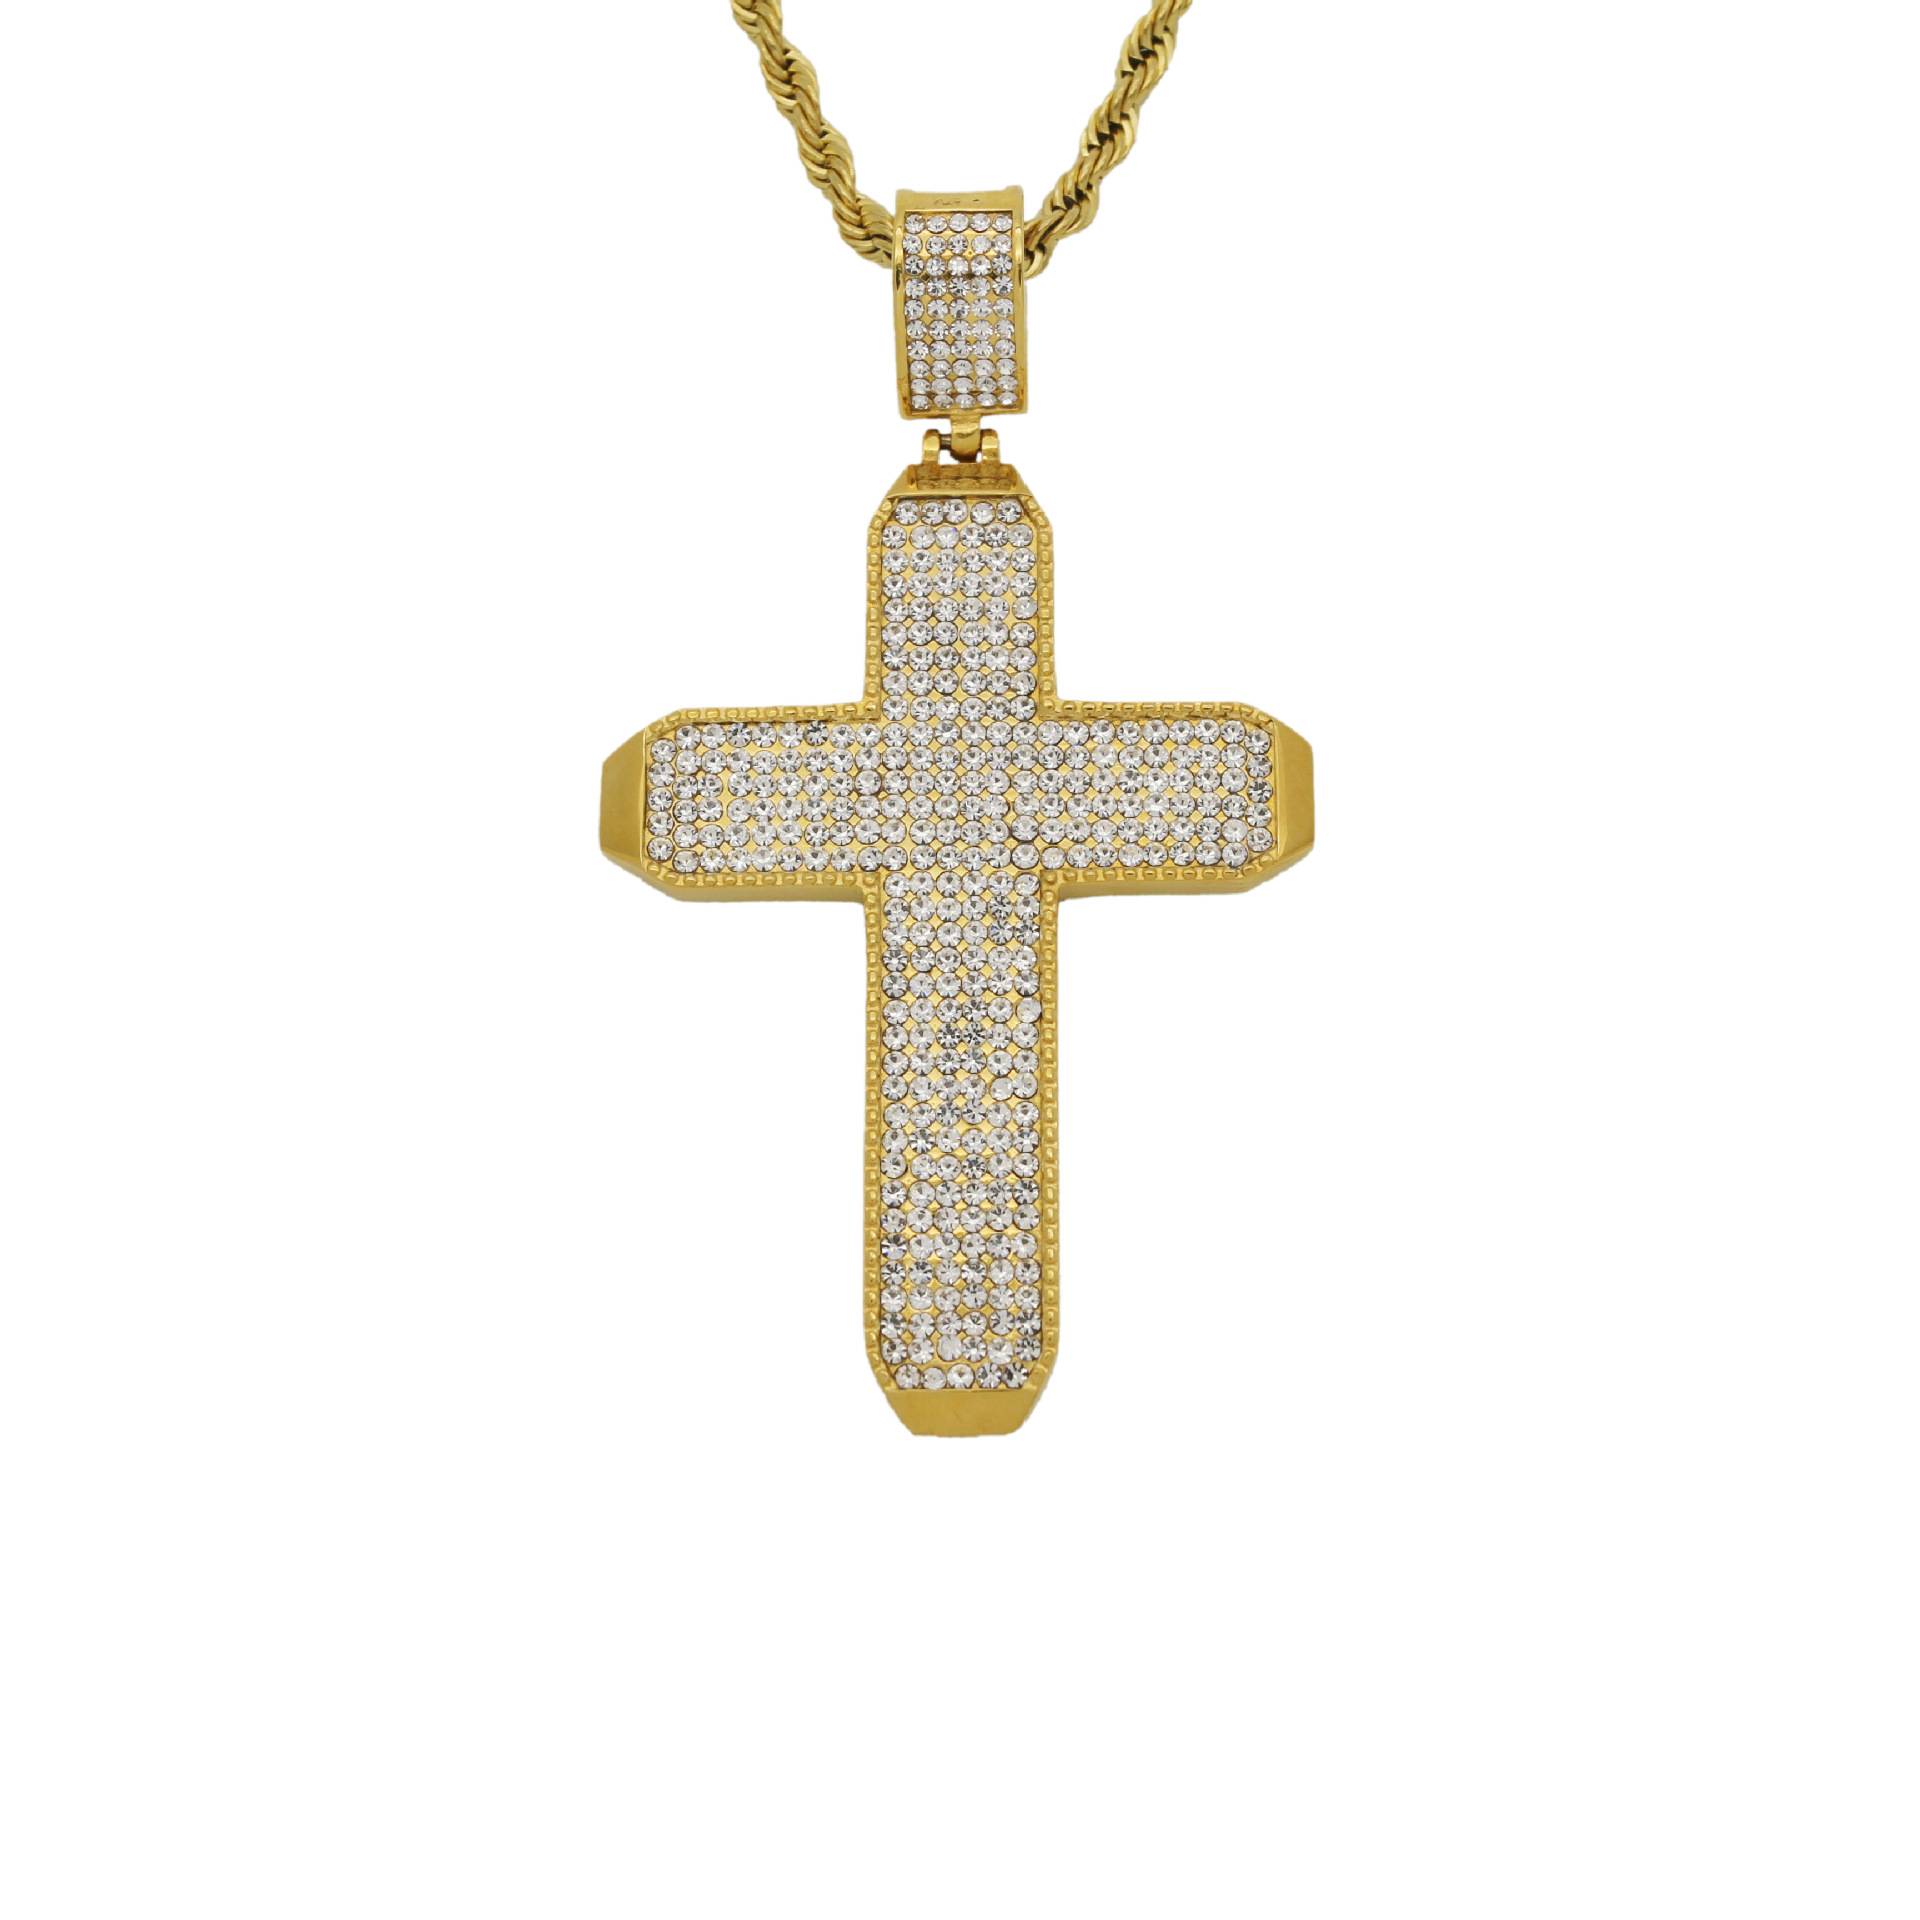 New Vintage Rhinestone Cross Necklace Jewelry Stainless Steel Gold Plated Crystal Christian Jesus Cross Pendant Necklace Jewelry